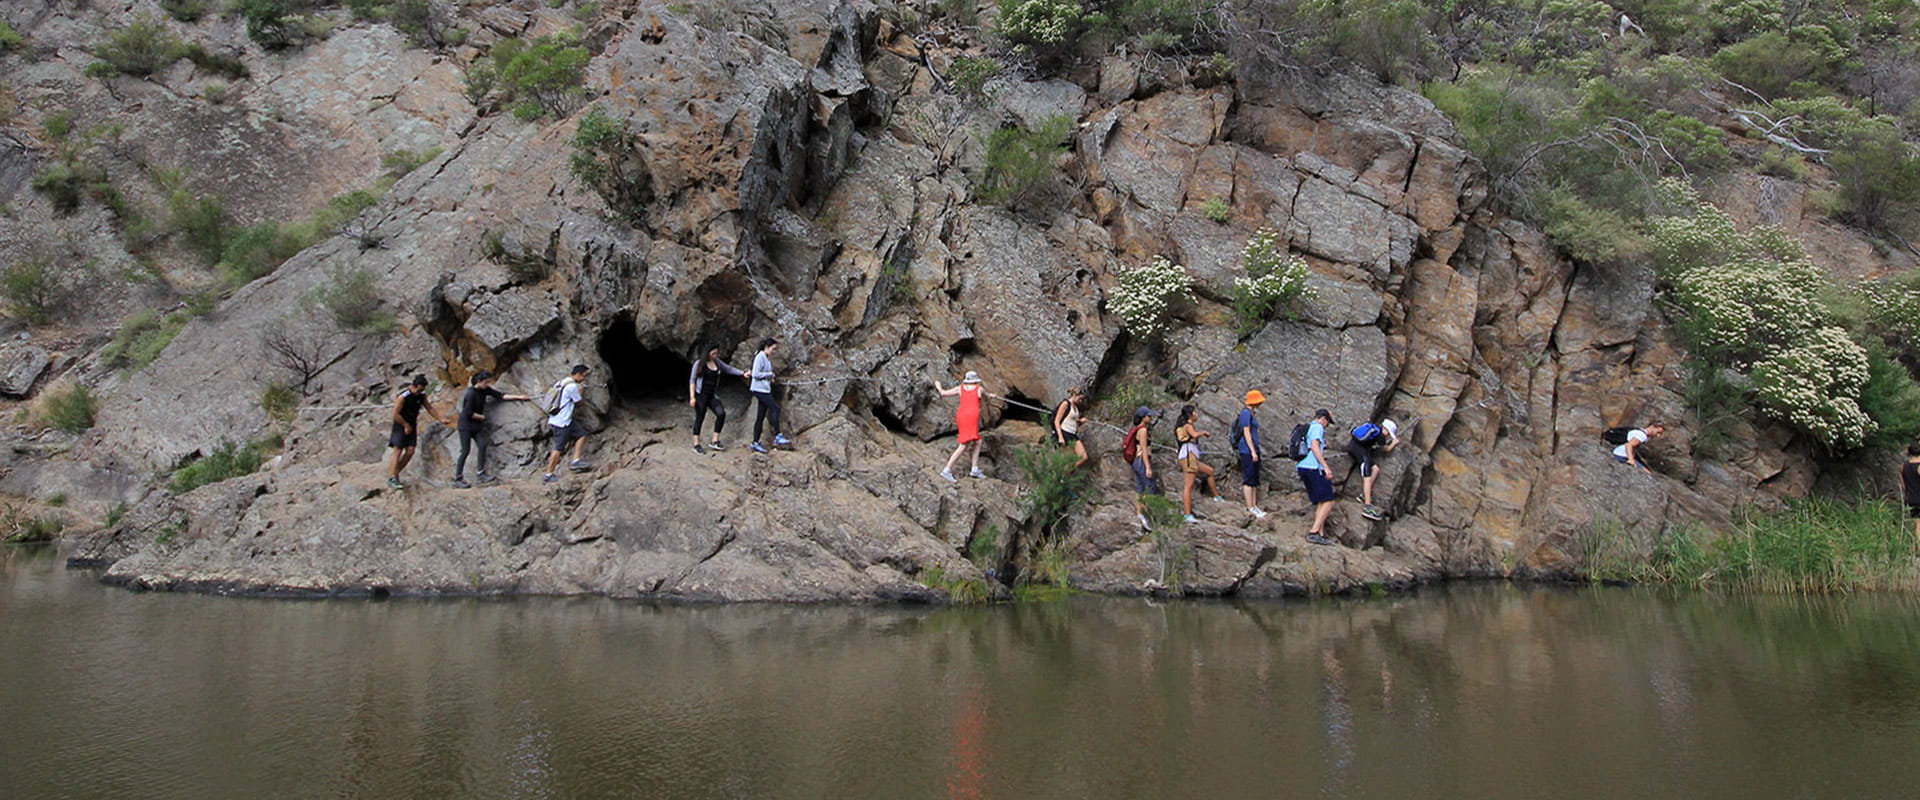 A group of walkers carefully make their way along the gorge just above the waterline using a wire guide embedded into the rock to help them along the path.